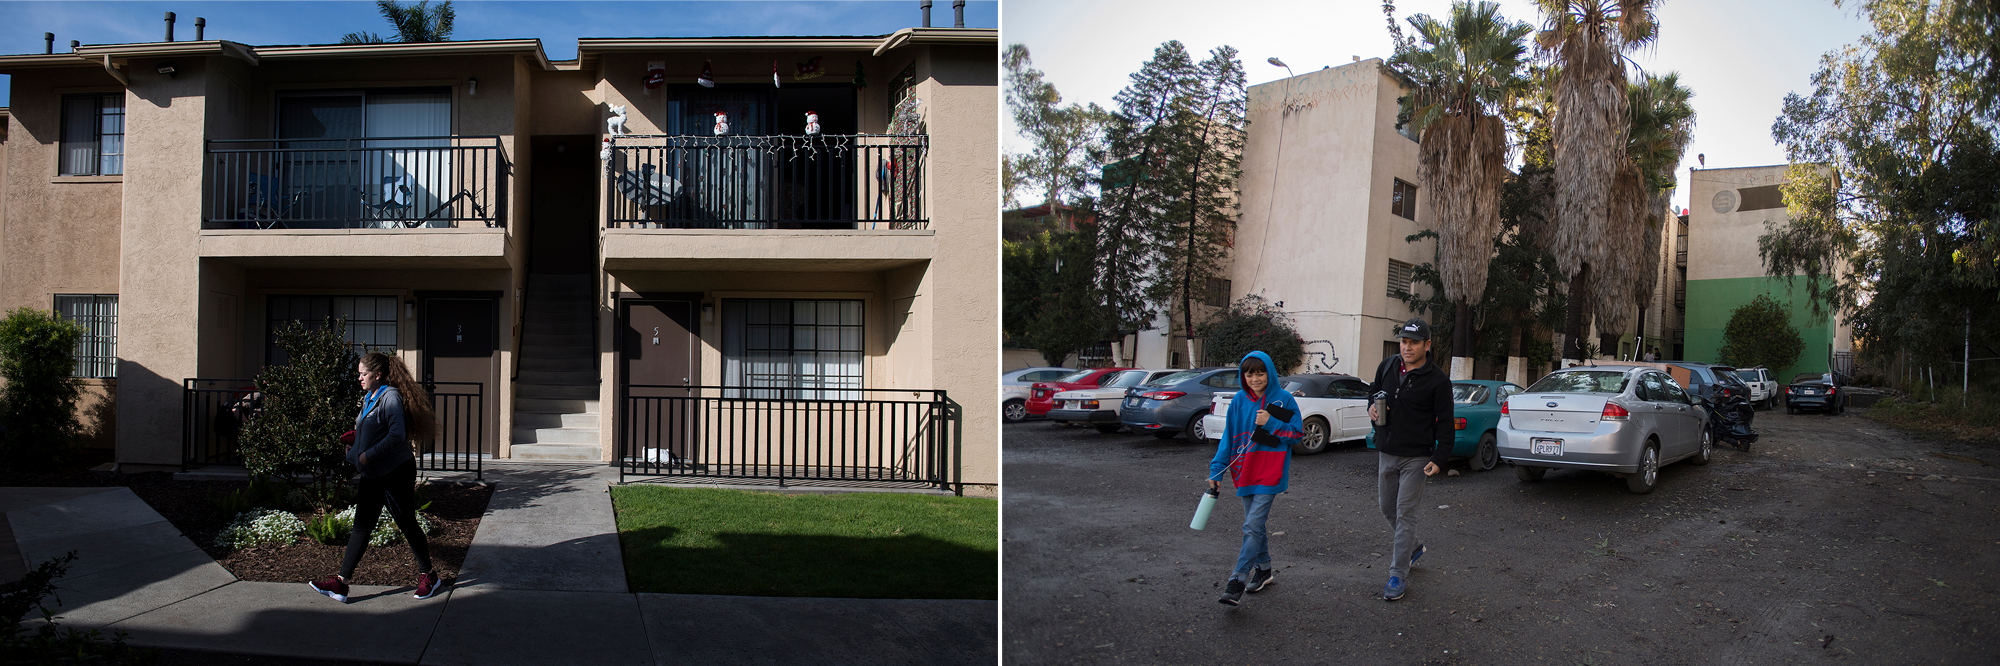 Leslie Flores, left, leaves her family's Chula Vista, Calif., apartment for work as a delivery driver at Domino's on Nov. 26. At right, Edward Flores, 12, heads to work with his father, Ramon on Nov. 29. The younger kids accompany Ramon to work at his job making cabinets in Tijuana because he is concerned about leaving them alone in the apartment. Images by Amanda Cowan. United States / Mexico, 2019.